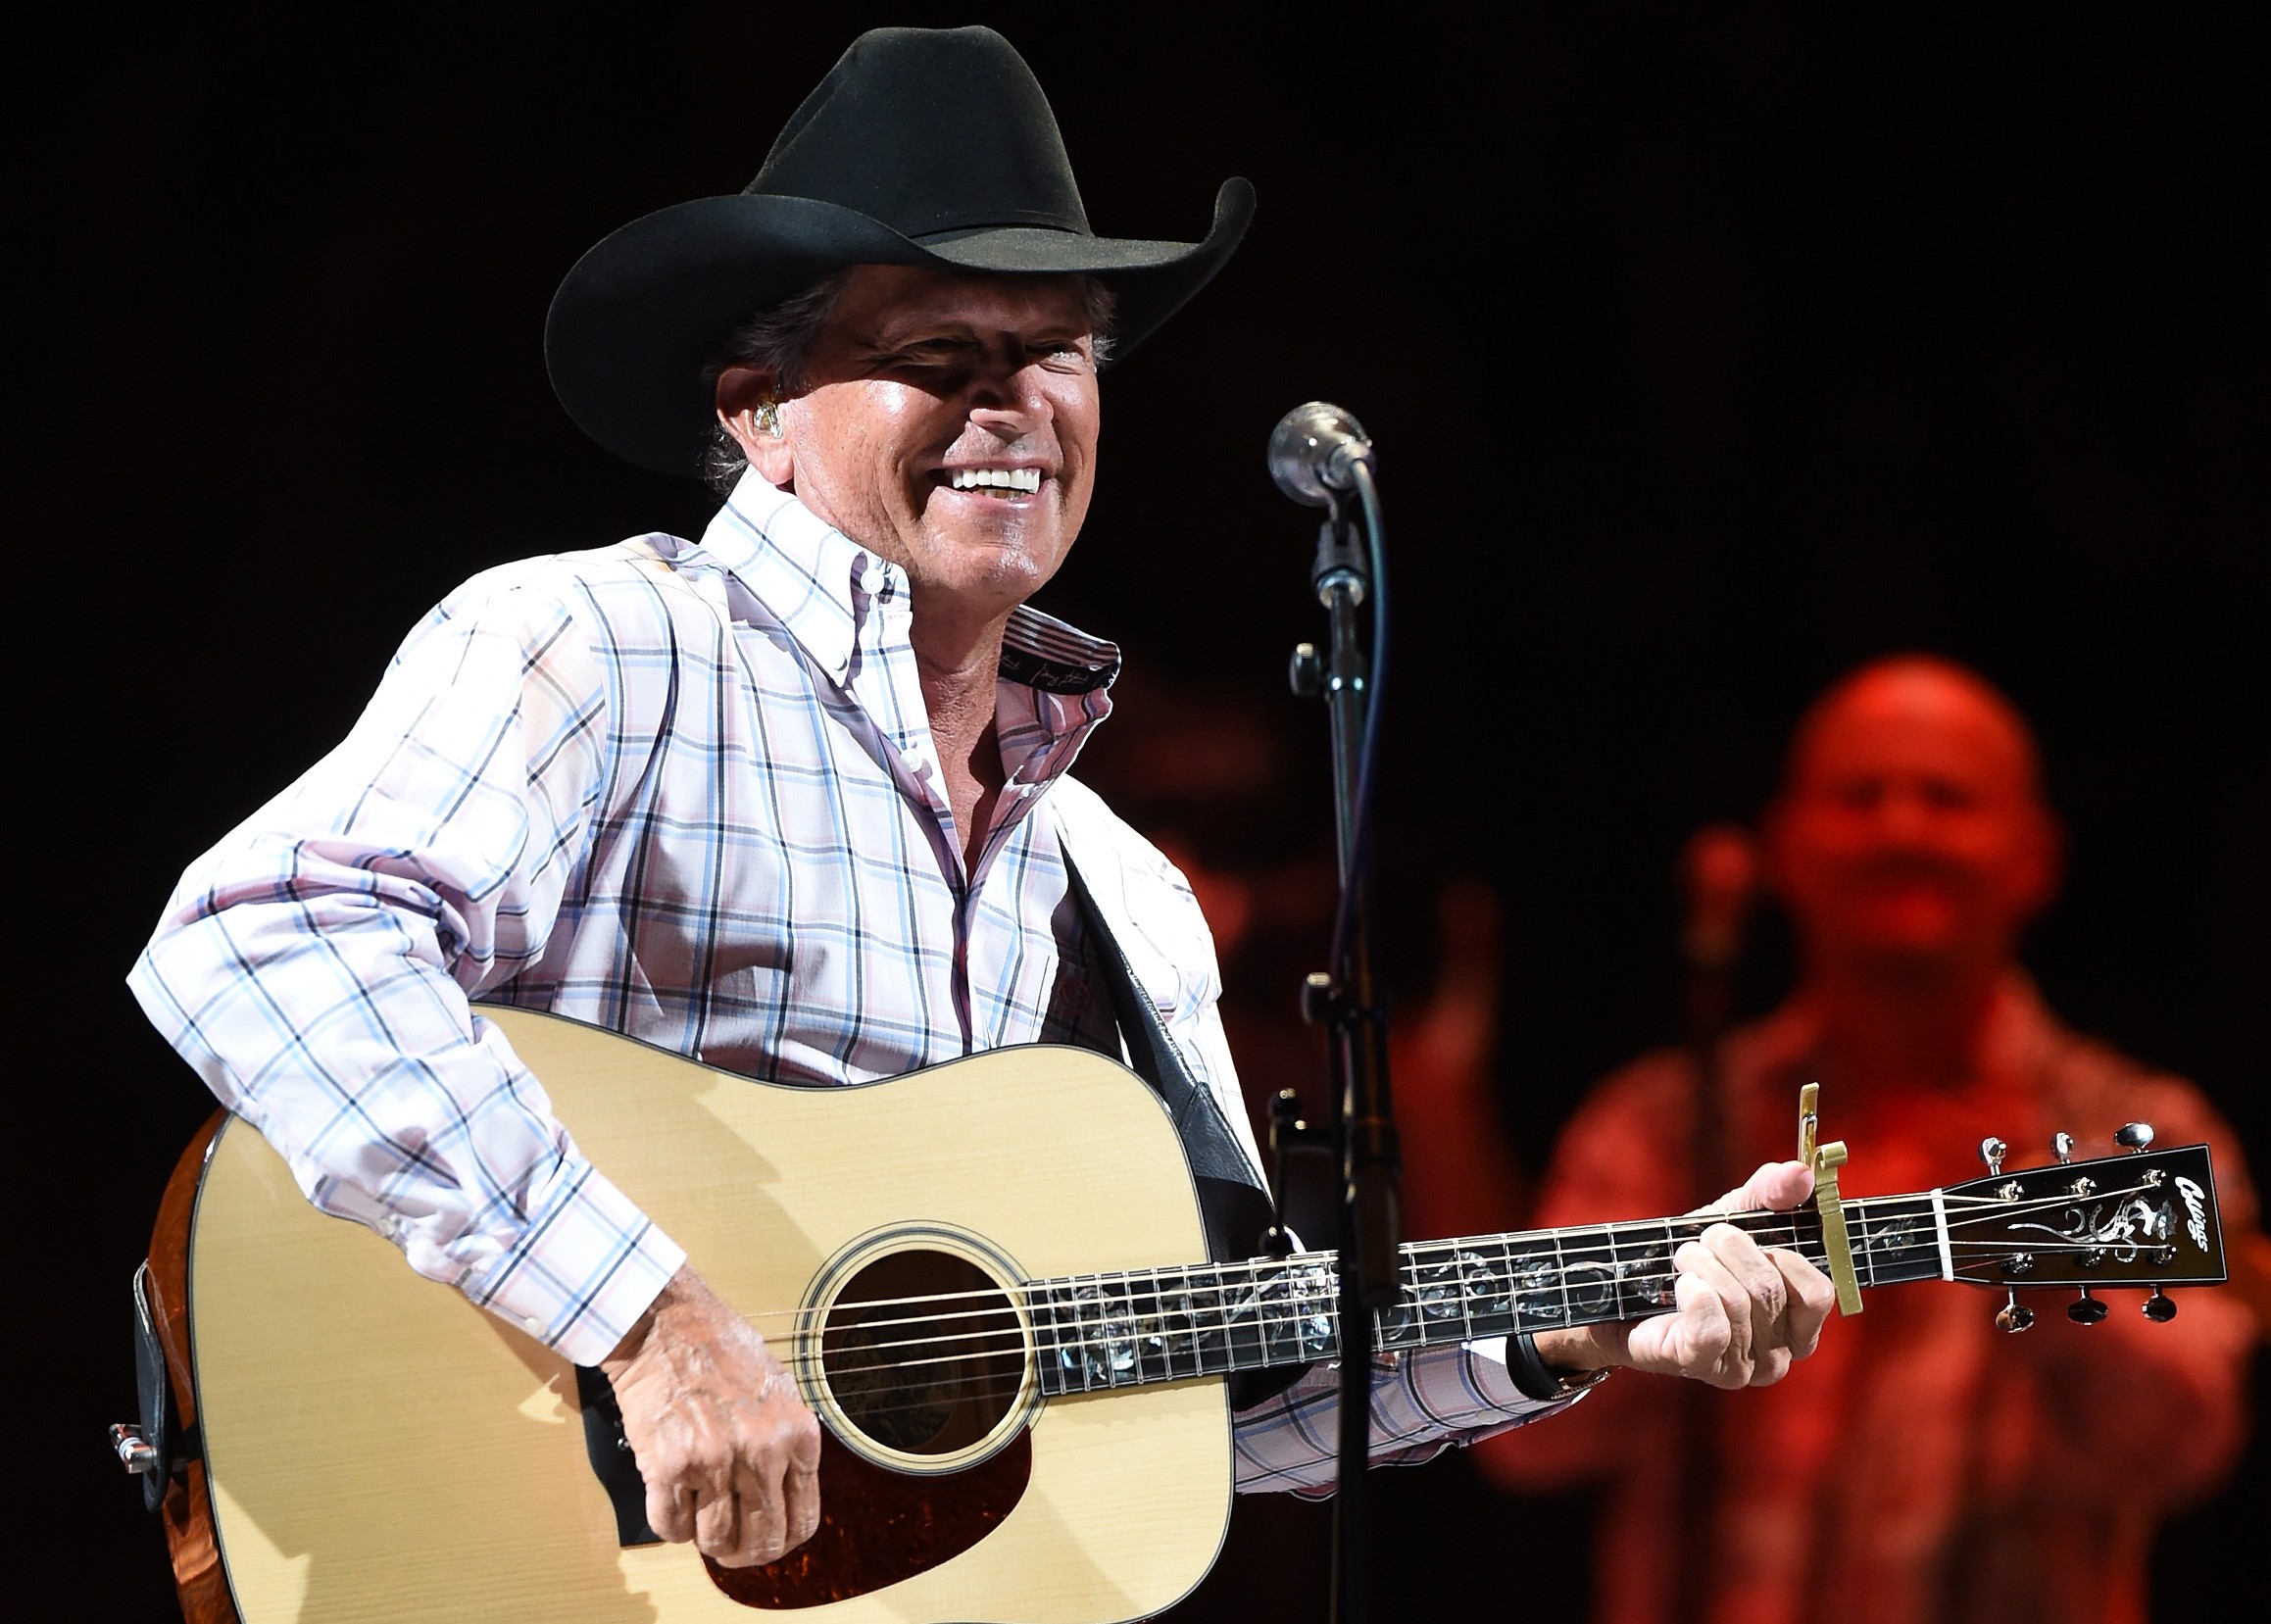 Strait Makes Triumphant Return to the Stage at Strait to Vegas